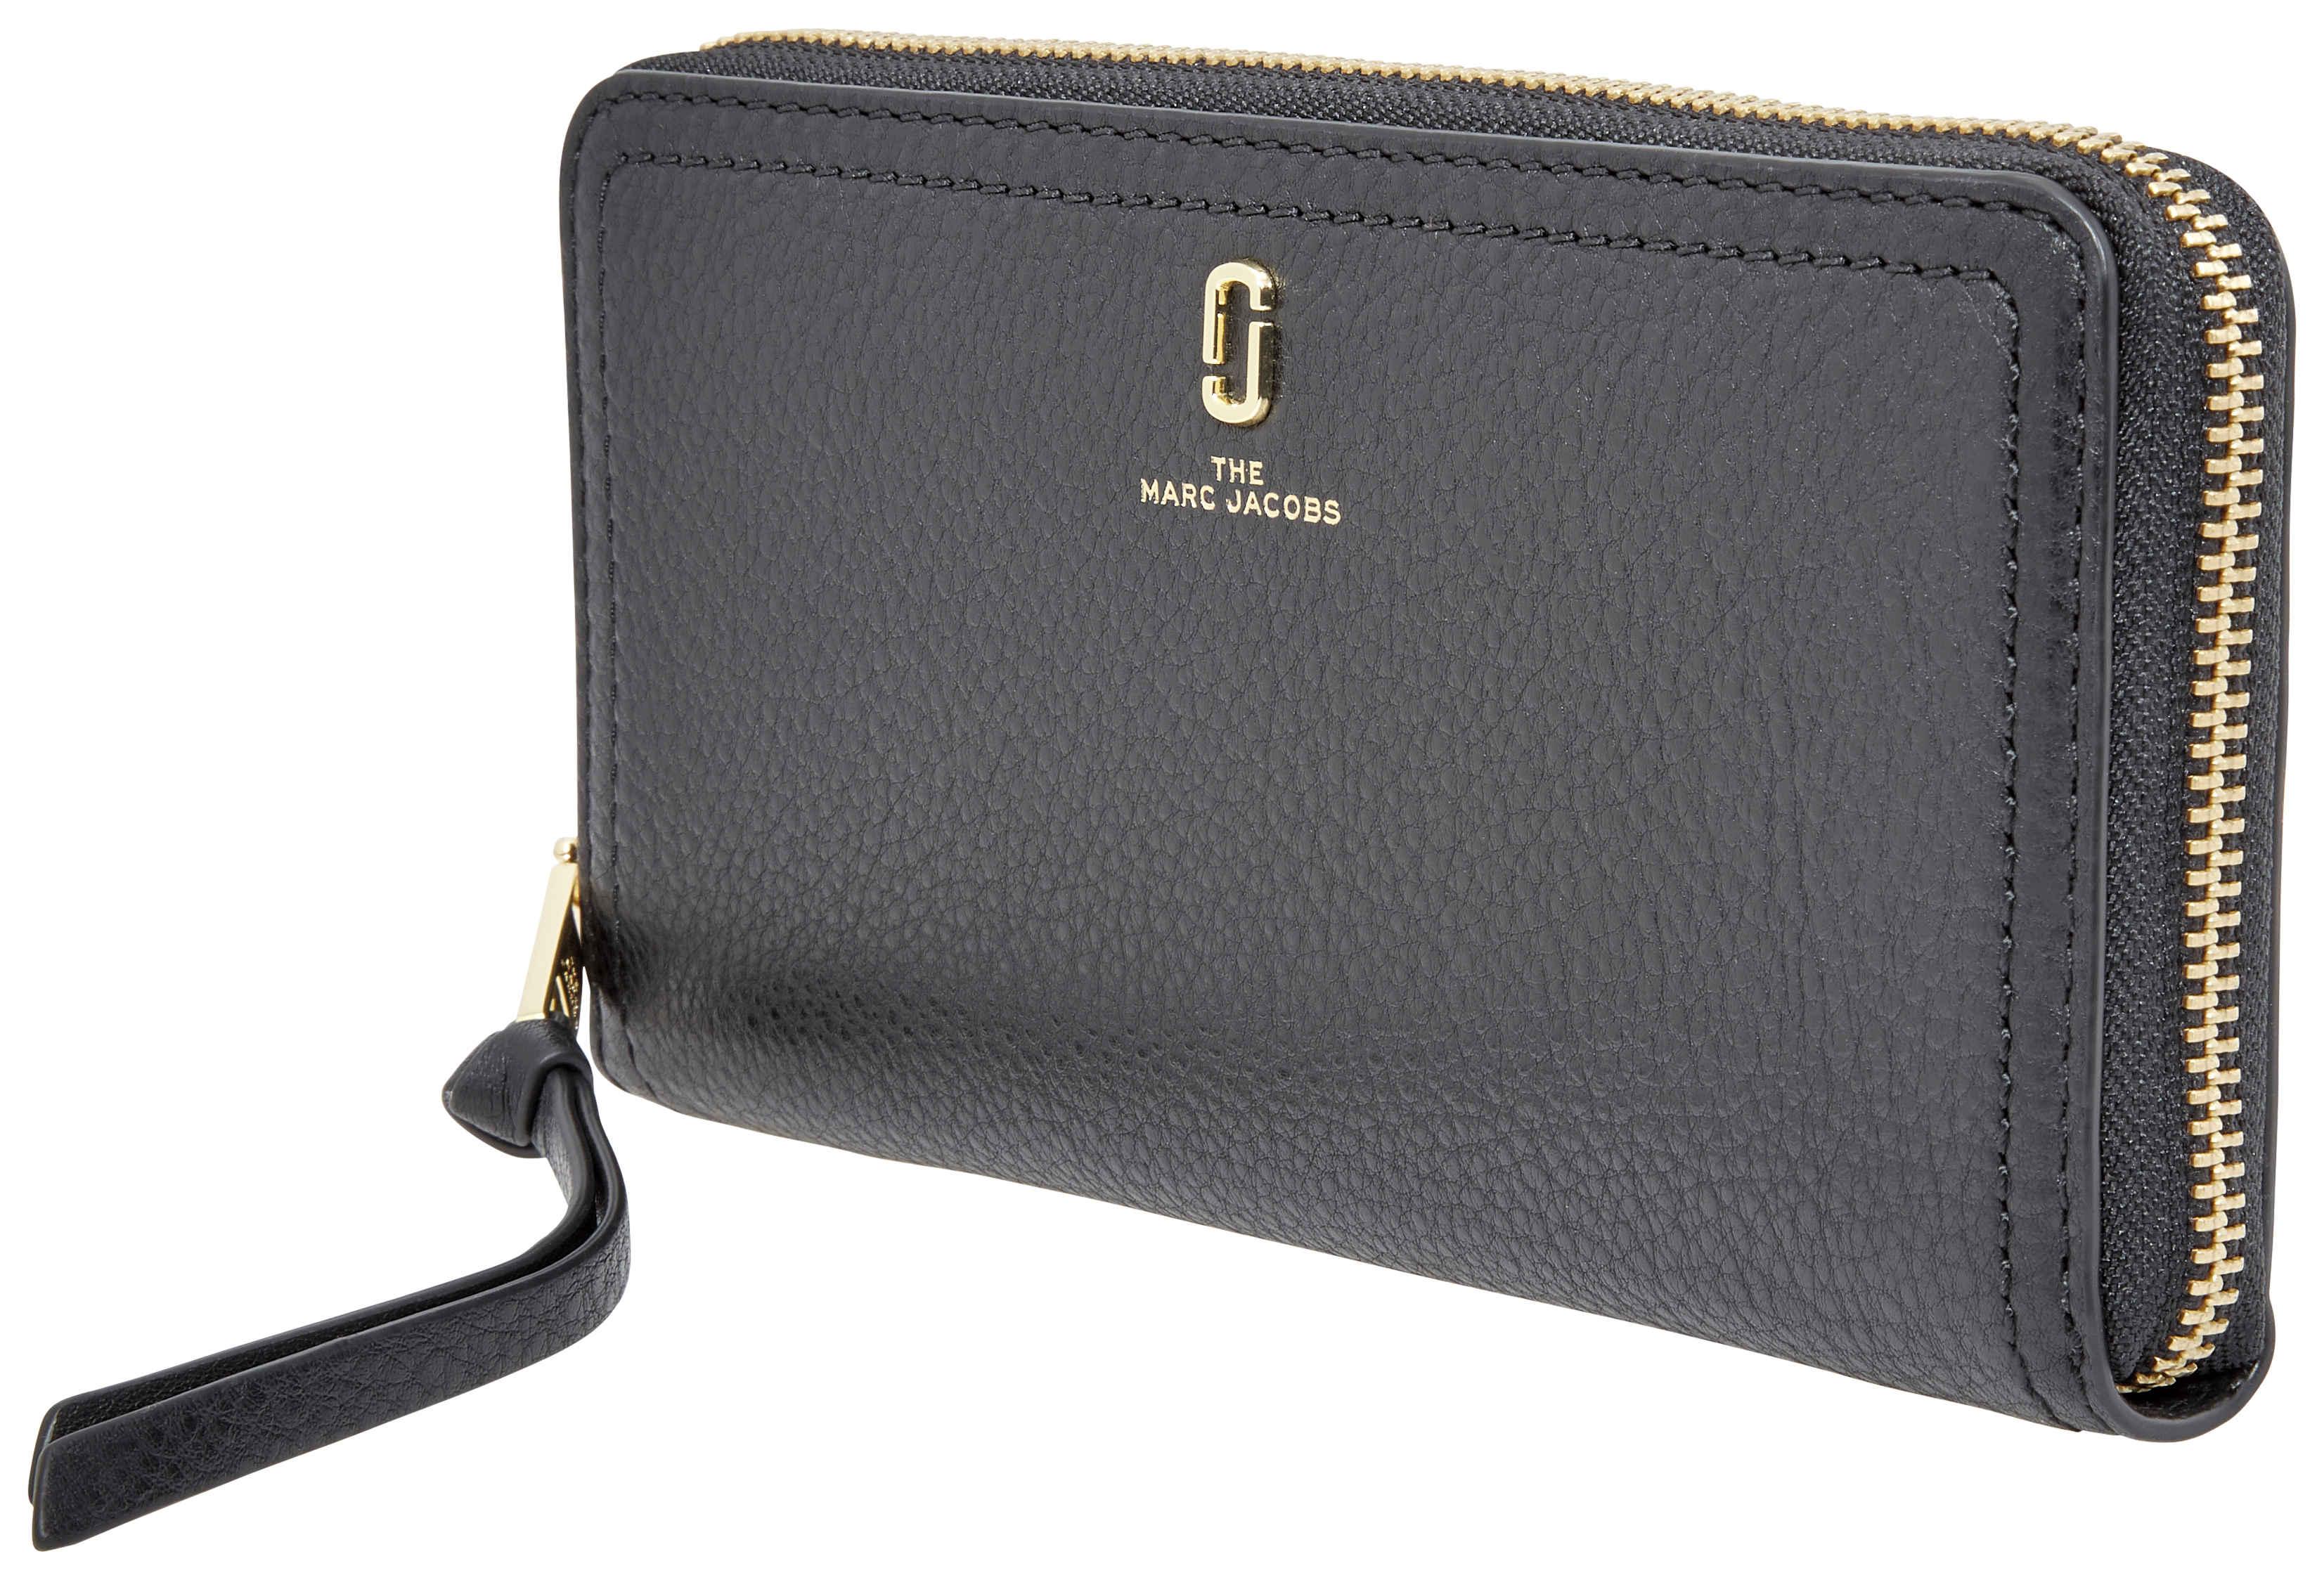 Marc Jacobs Leather Standard Continental Wallet in Black,Gold Tone 